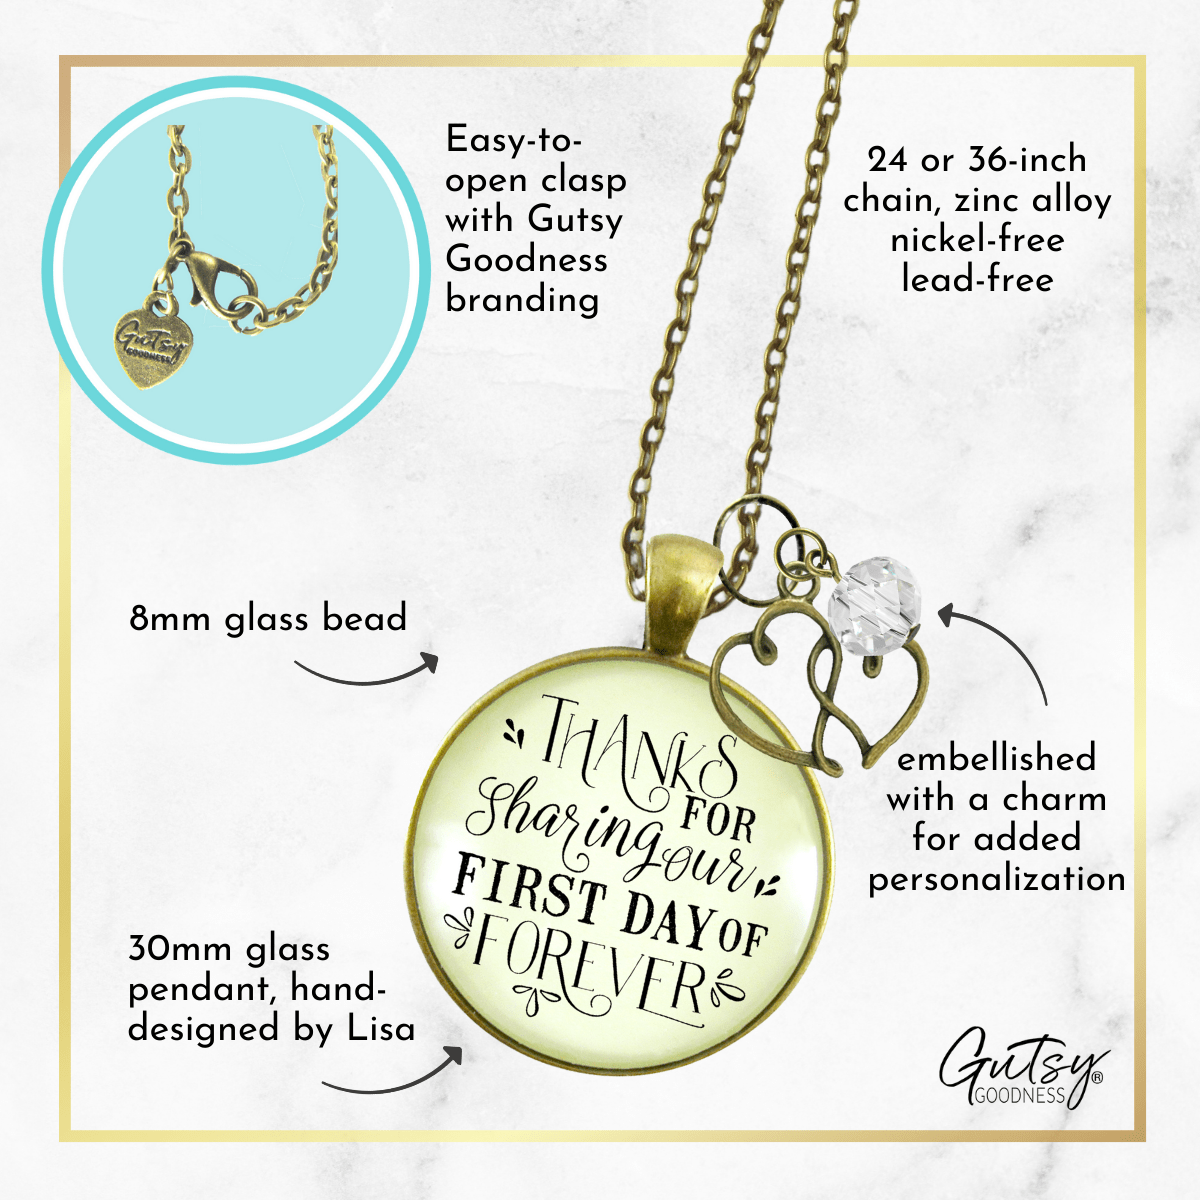 Gutsy Goodness Wedding Officiant Gift Necklace Thanks for Sharing Day Heart Charm - Gutsy Goodness Handmade Jewelry;Wedding Officiant Gift Necklace Thanks For Sharing Day Heart Charm - Gutsy Goodness Handmade Jewelry Gifts